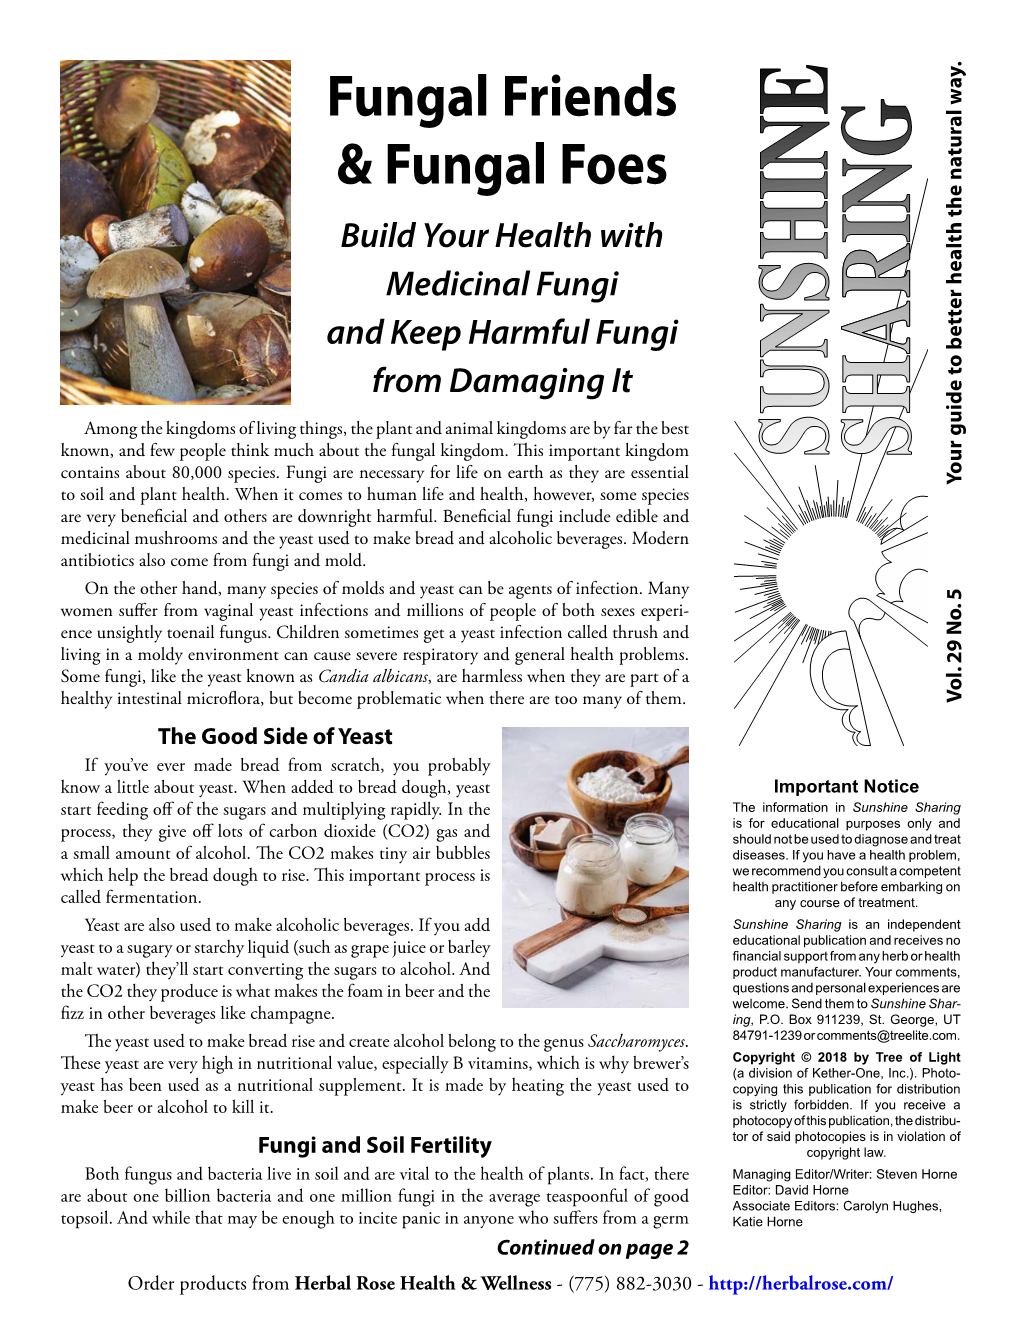 Fungal Friends and Foes